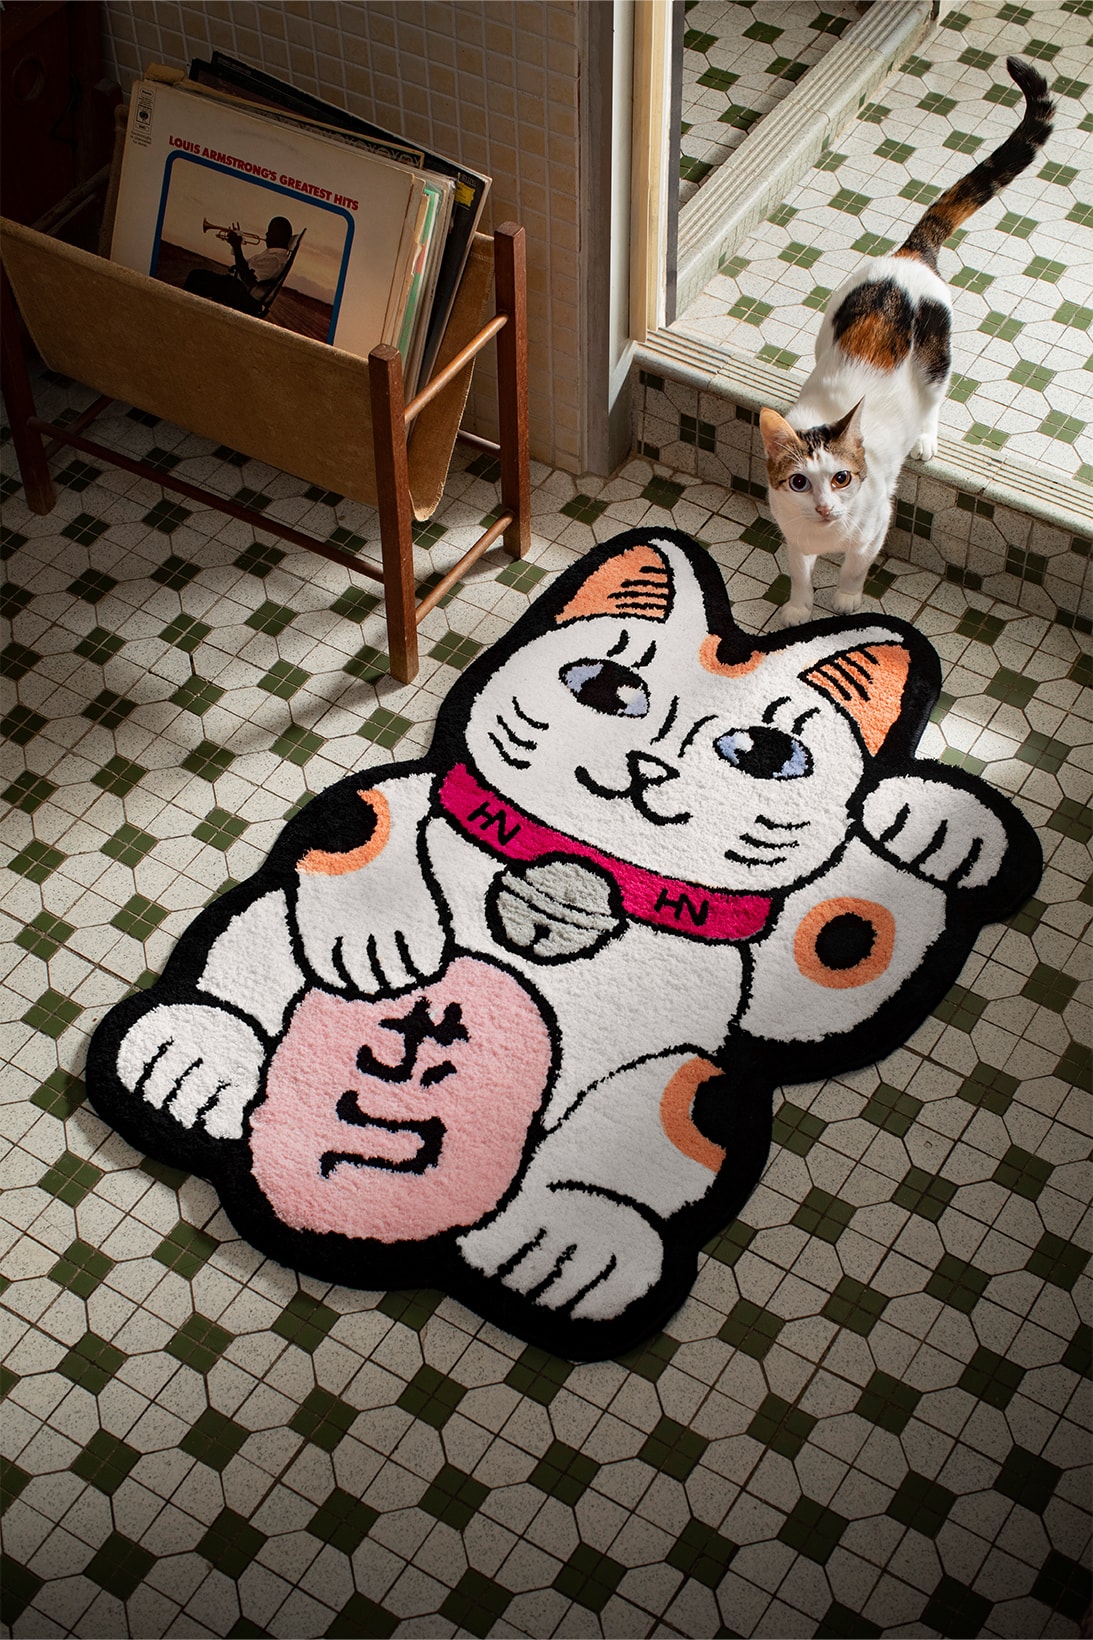 Harvey Nichols RAW EMOTIONS "Lucky Cat" Rug Limited-Edition Lunar New Year White Pastel Pink Lifestyle Image